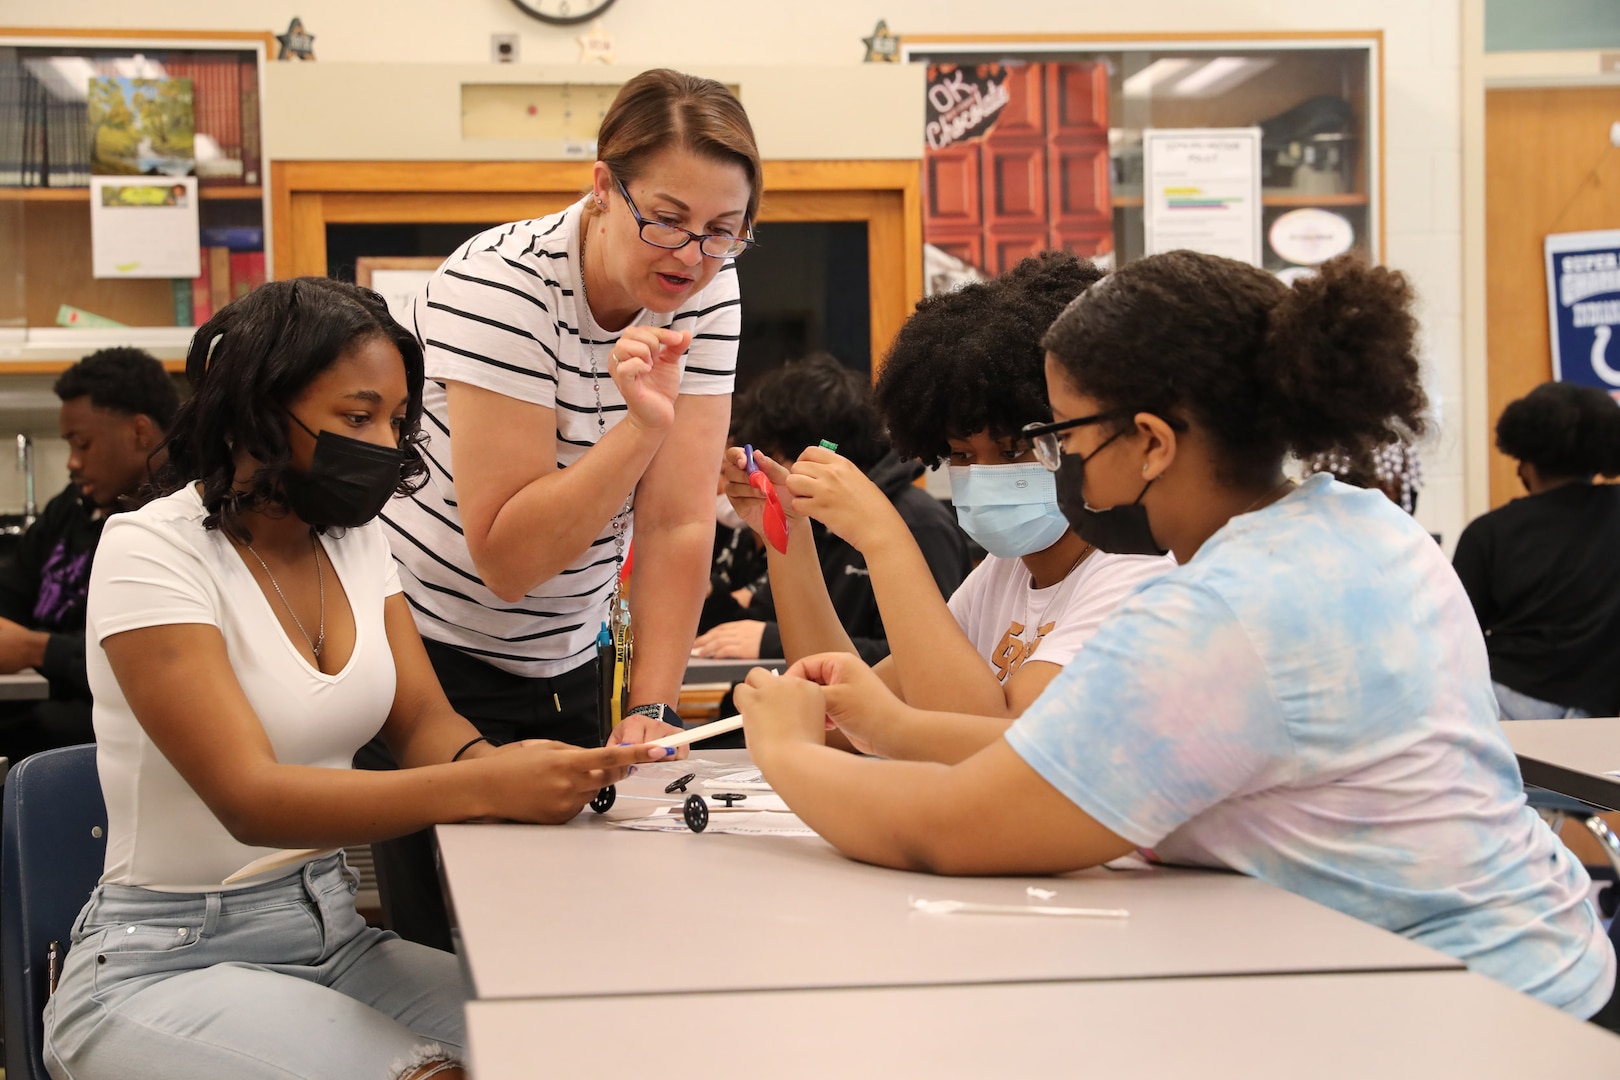 A science teacher Erin Lewis explains instructions for a STEM activity with her students as they work as a team to build a balloon buggy.